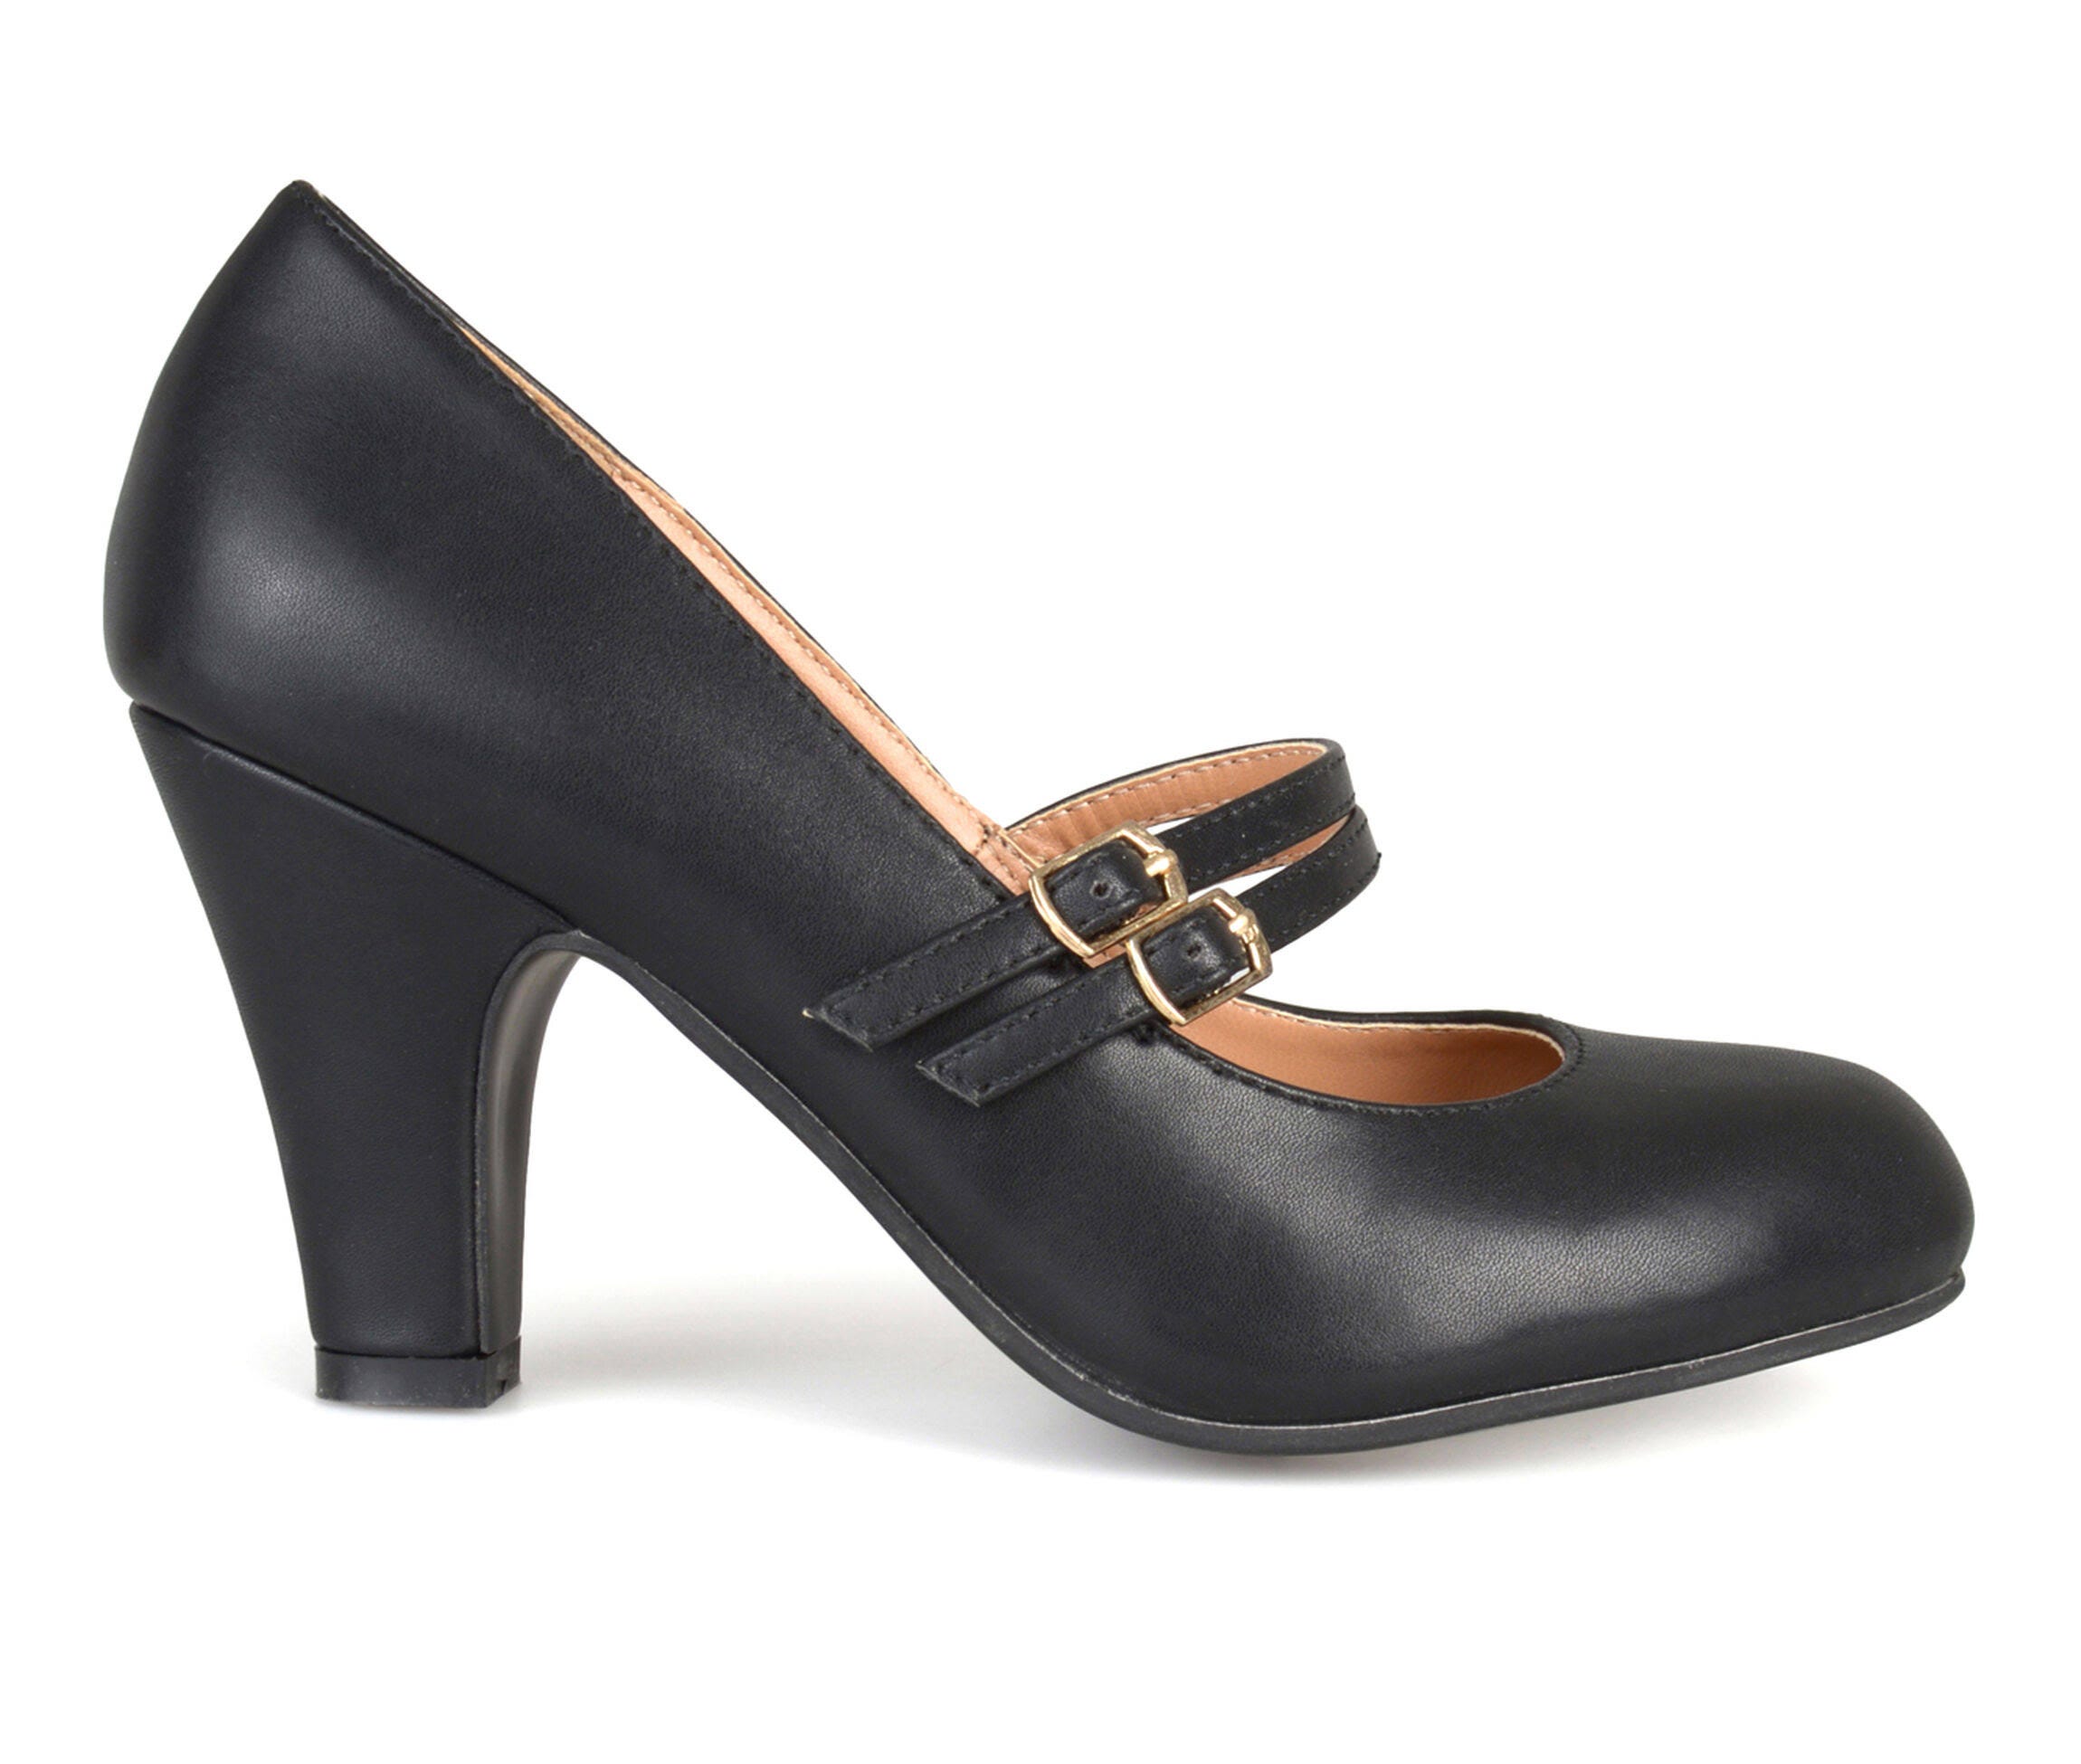 Comfortable and Chic Mary Jane Pump: Journee Collection Windy Wide Width Heels | Image